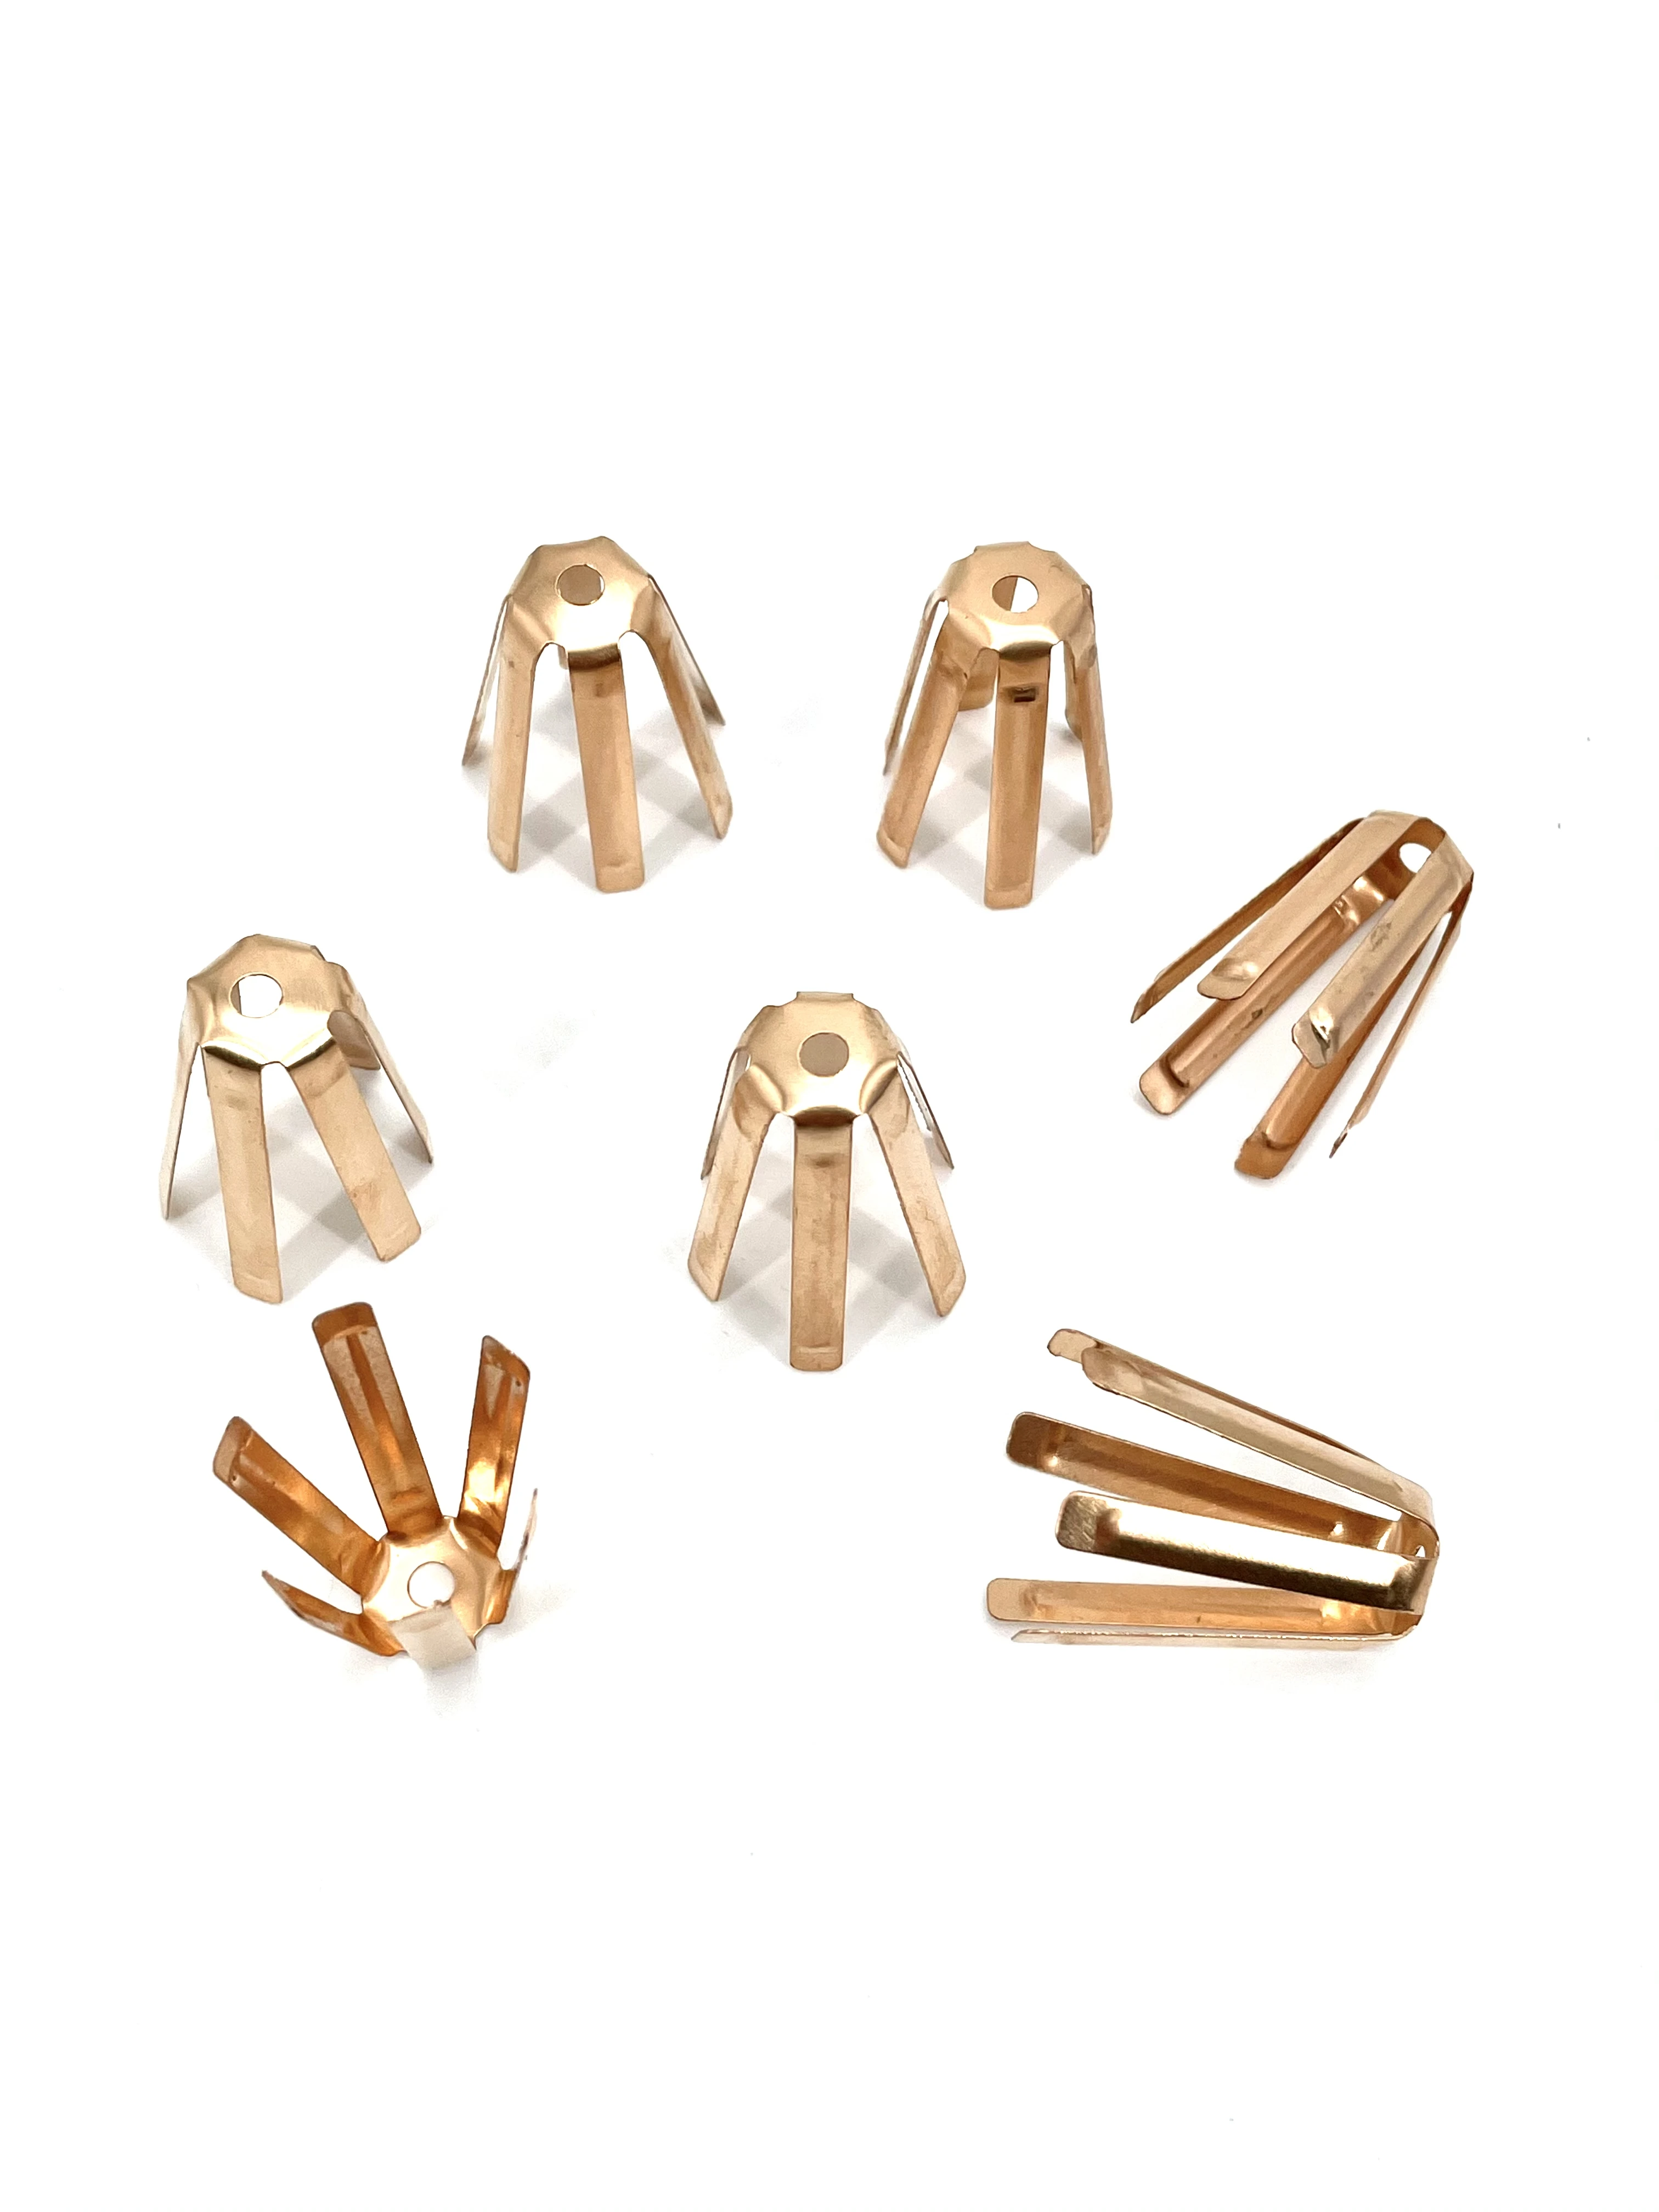 Universal Brass Golf Shaft Adapter Spacer Shims for 0.335/0.350 Driver Fairway Wood Hybrid Golf Club Heads Accessories